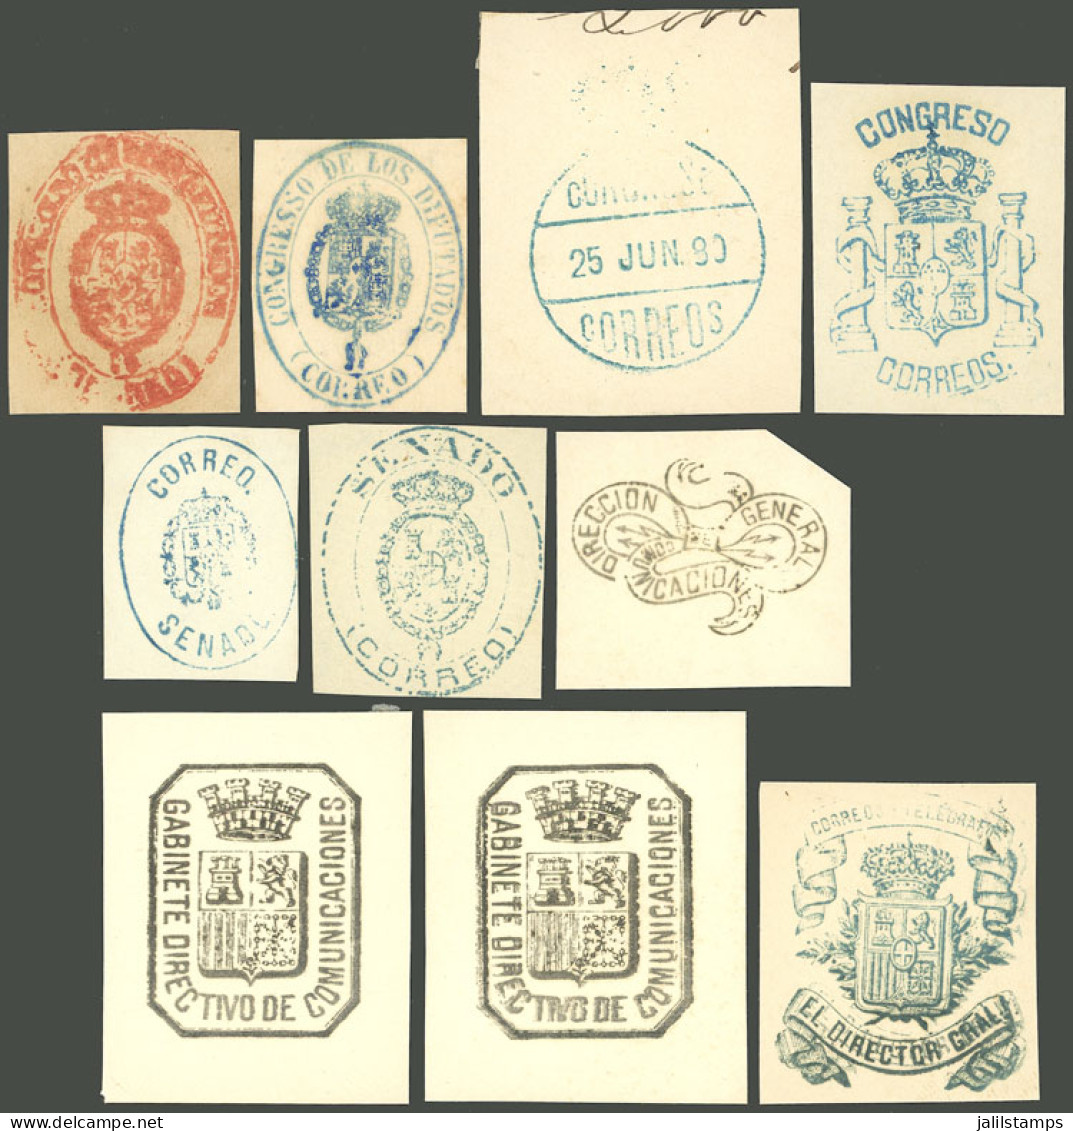 SPAIN: Small Lot Of Old Fragments With Free Frank Marks: Diputados, Senadores, Director De Correos, Etc., VF Quality! - Unclassified